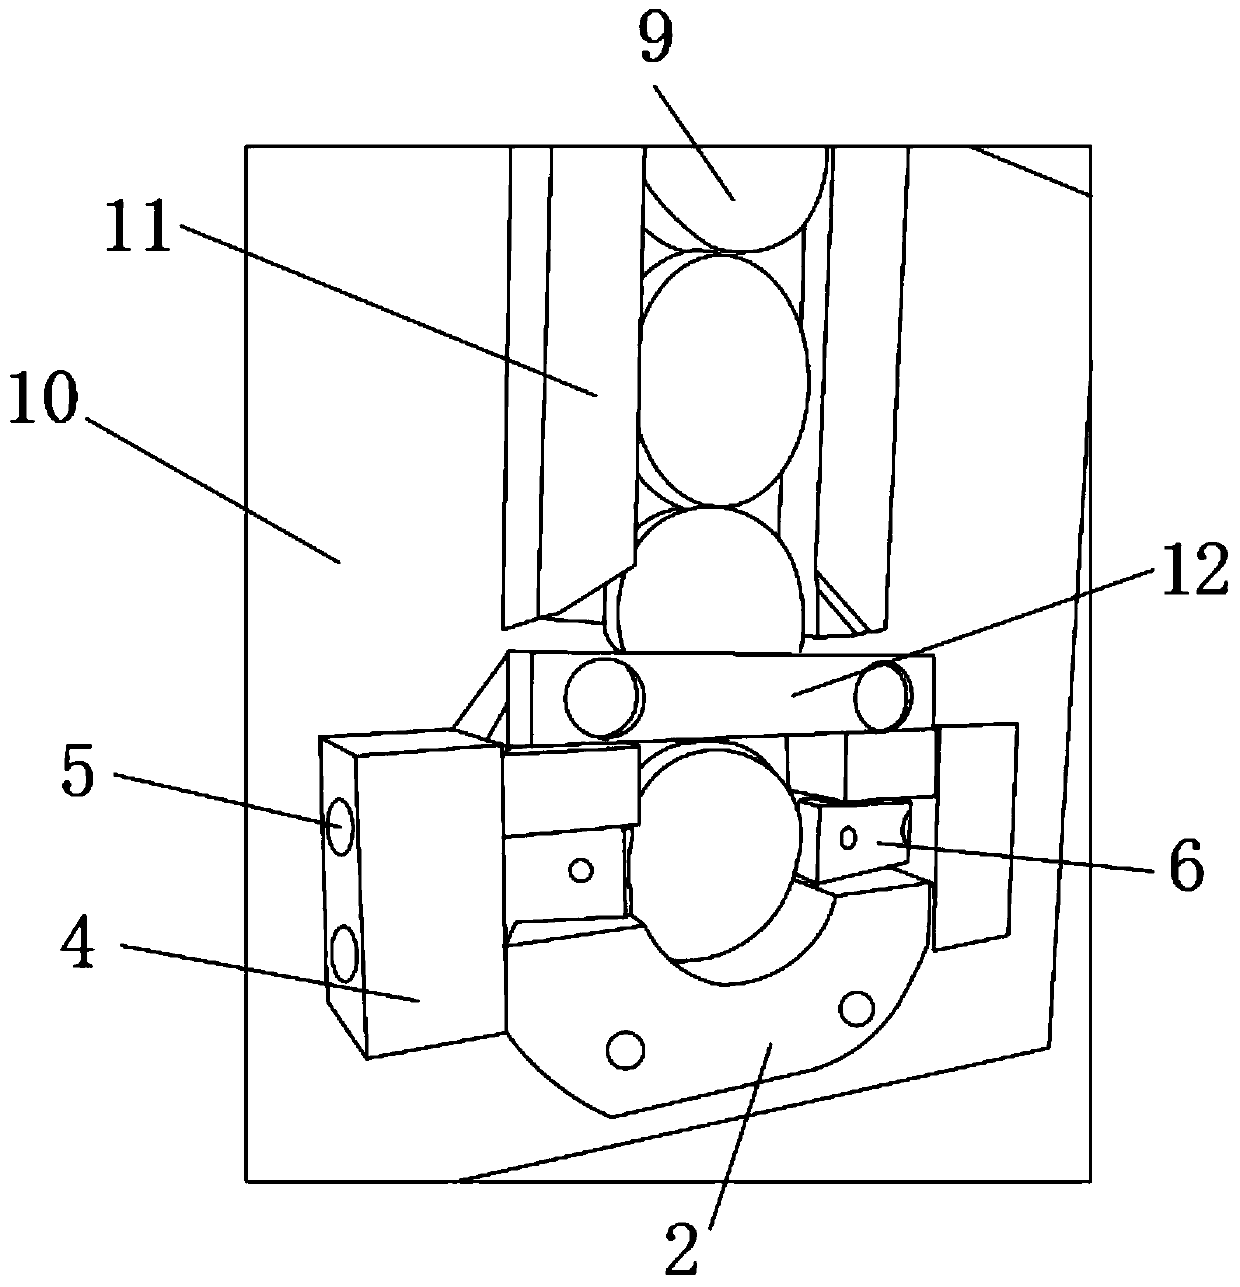 A bowl-shaped plug press-fitting device for engine cylinder block and cylinder head